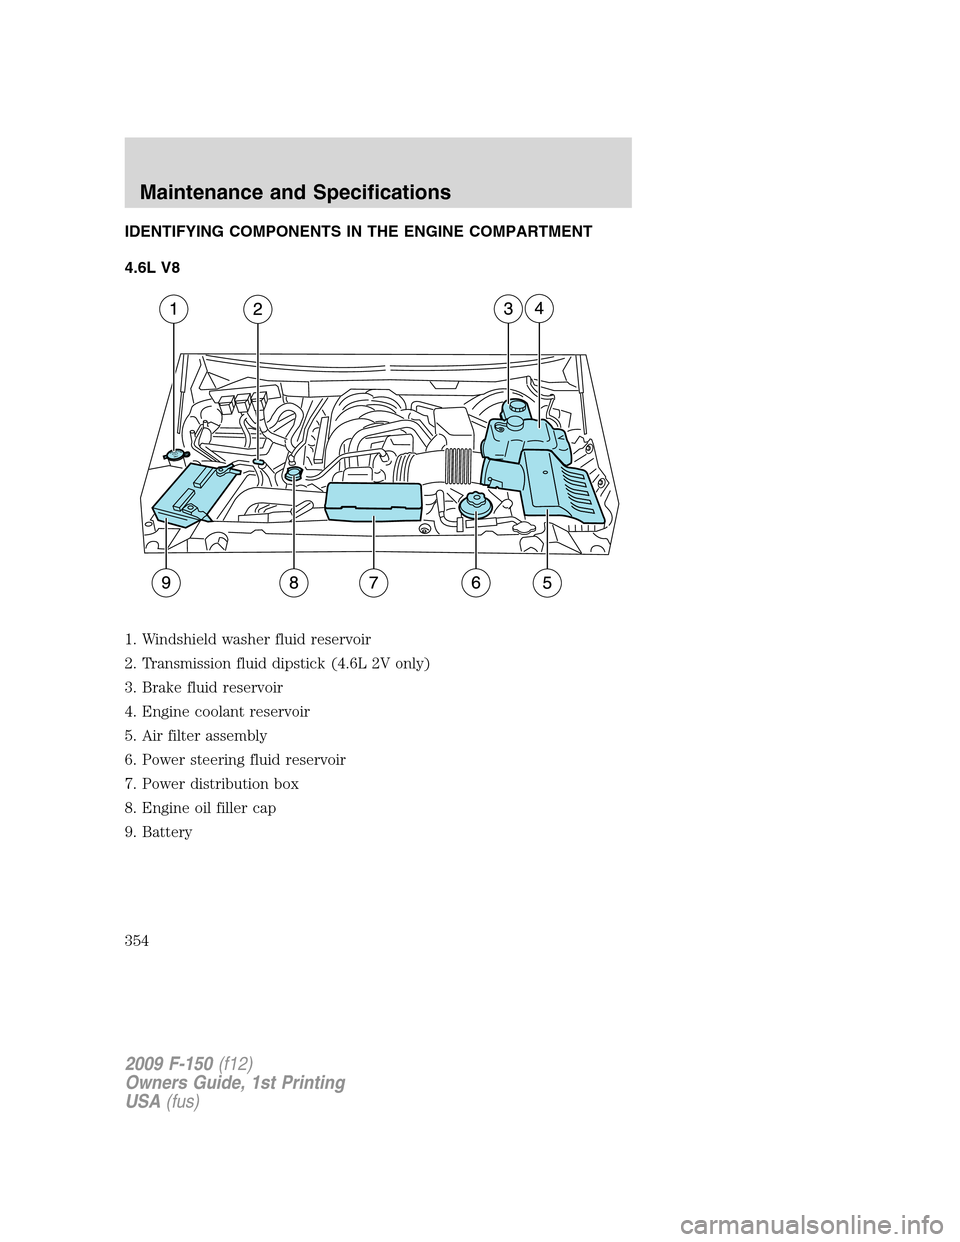 FORD F150 2009 12.G Owners Manual IDENTIFYING COMPONENTS IN THE ENGINE COMPARTMENT
4.6L V8
1. Windshield washer fluid reservoir
2. Transmission fluid dipstick (4.6L 2V only)
3. Brake fluid reservoir
4. Engine coolant reservoir
5. Air 